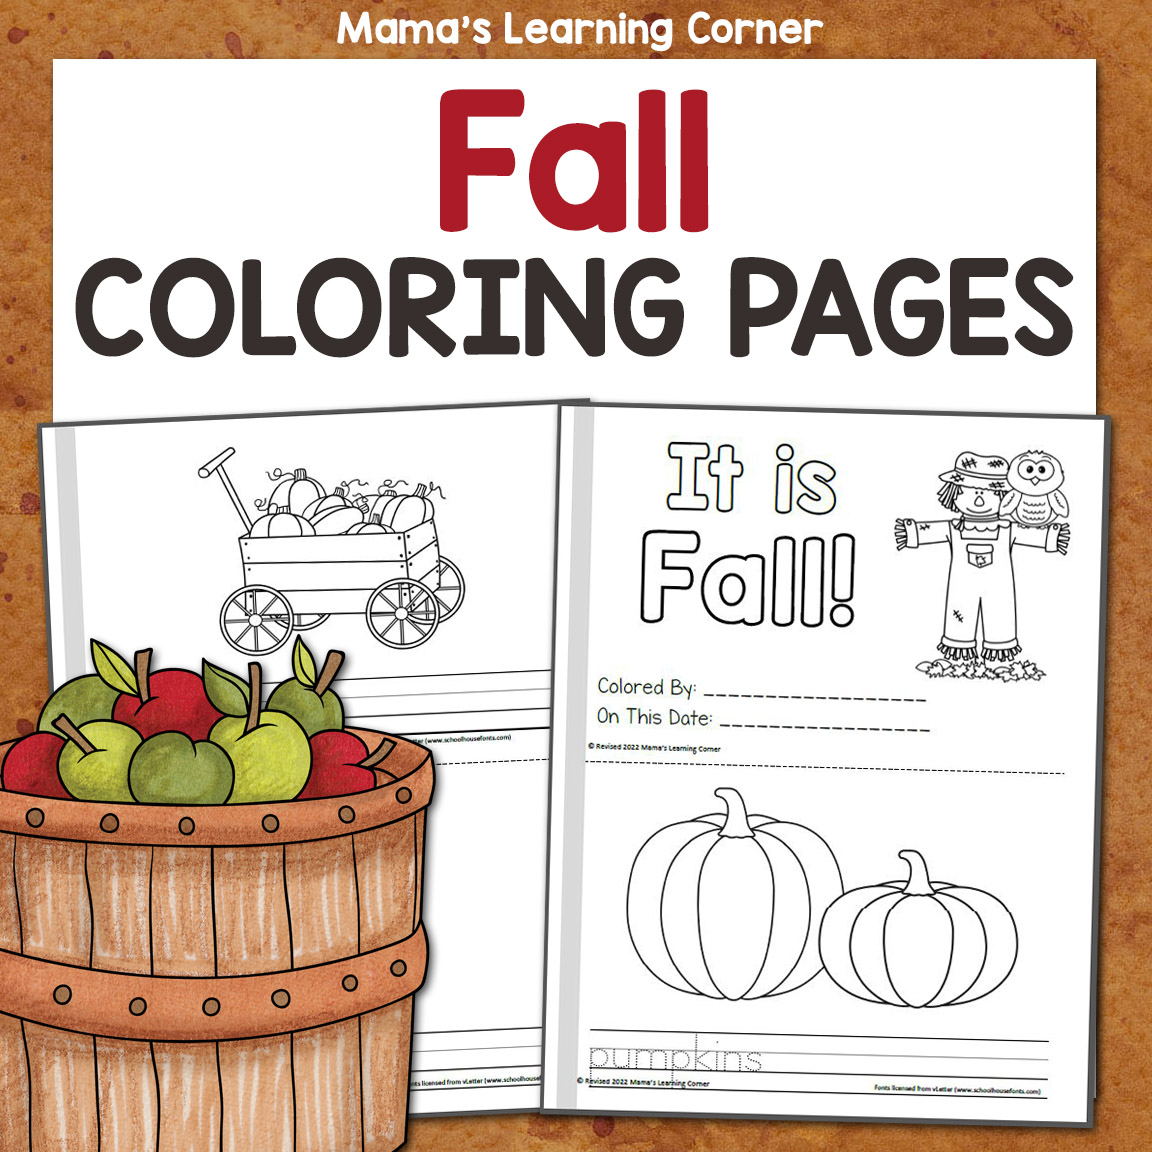 Its fall coloring pages